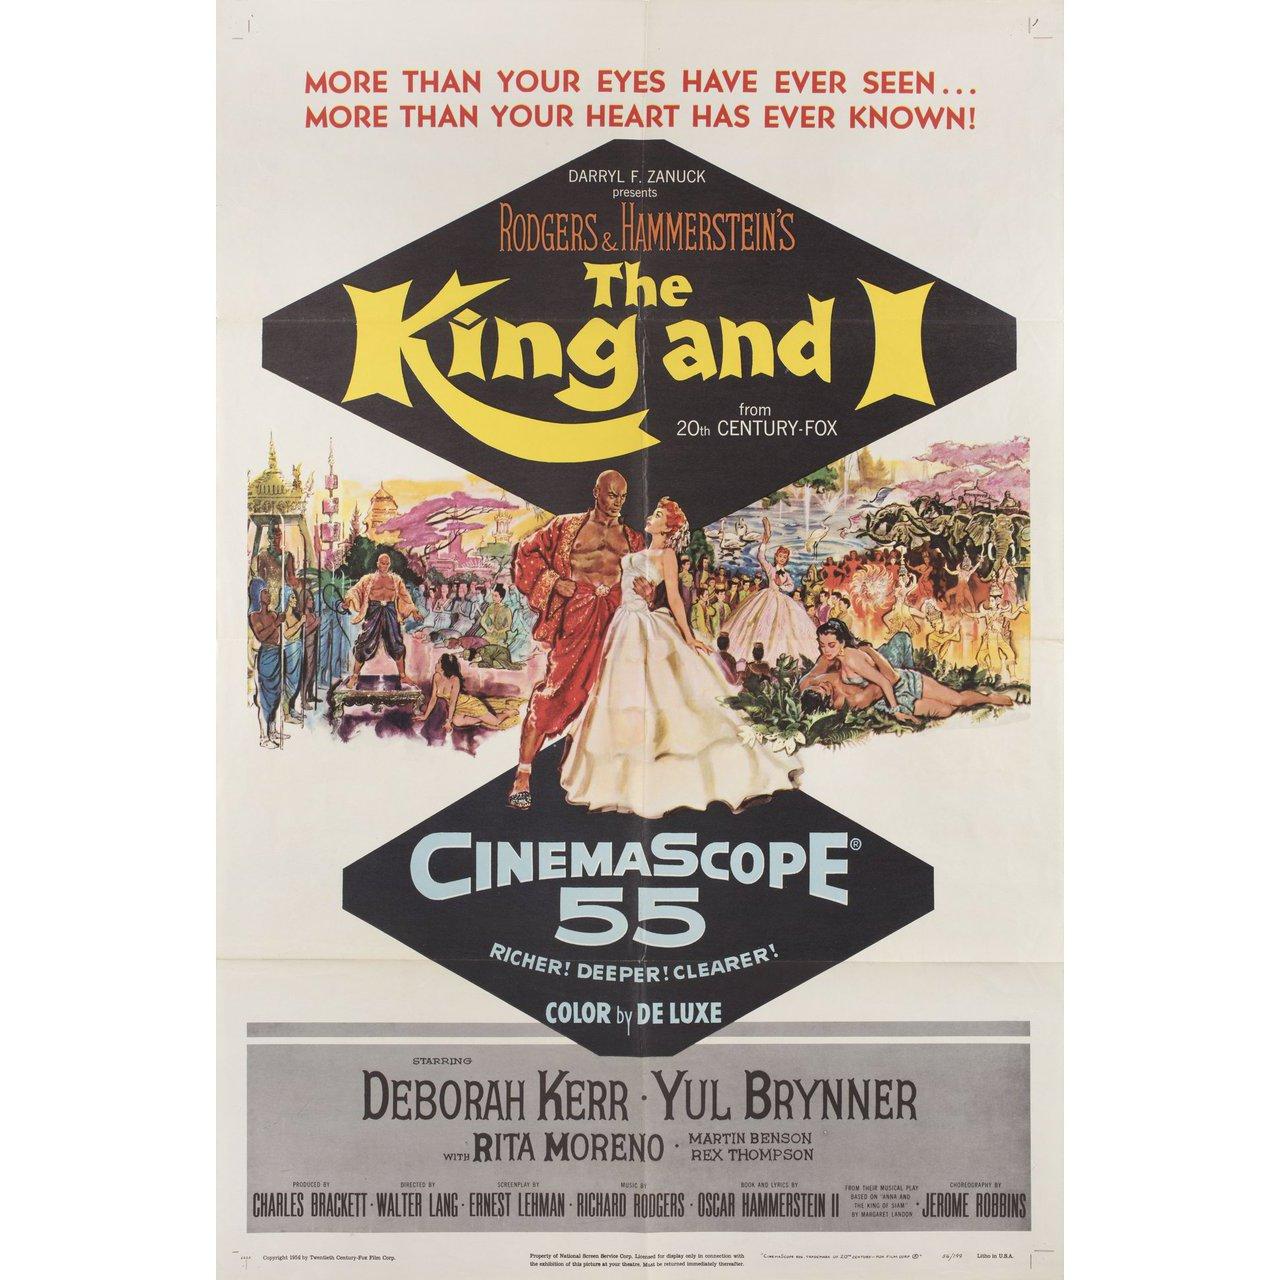 Original 1956 U.S. one sheet poster for the film The King and I directed by Walter Lang with Deborah Kerr / Yul Brynner / Rita Moreno / Martin Benson. Very Good condition, folded with pinholes & tears. Many original posters were issued folded or